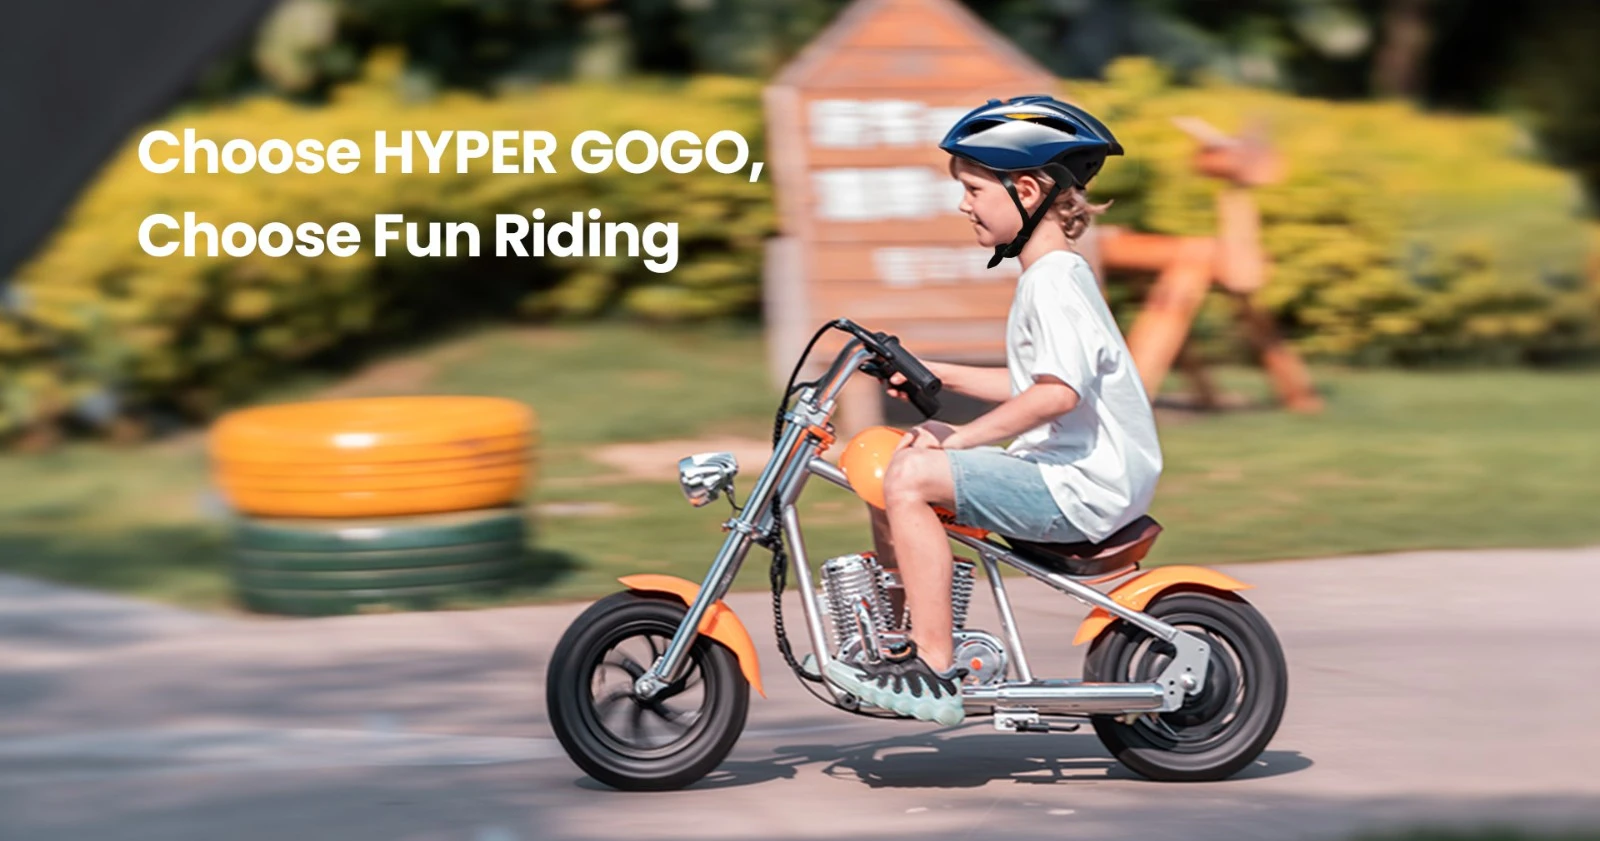 HYPER GOGO Challenger 12 Plus with App Electric Motorcycle for Kids 12'' Pneumatic Tires Bluetooth Speaker Fog - Orange